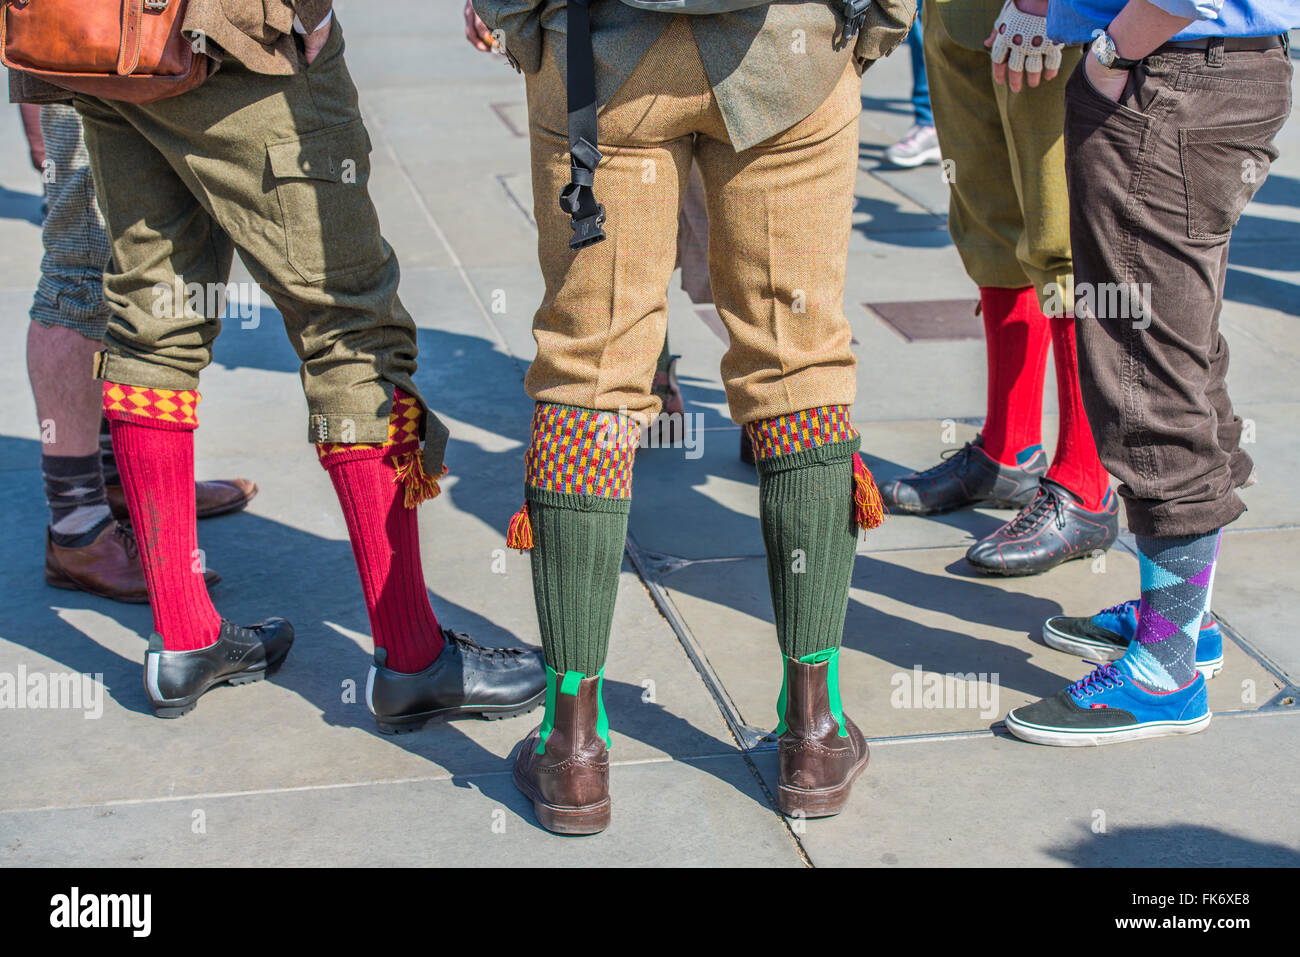 Colourful socks and shoes of participants of Tweed Run in Trafalgar Square Stock Photo